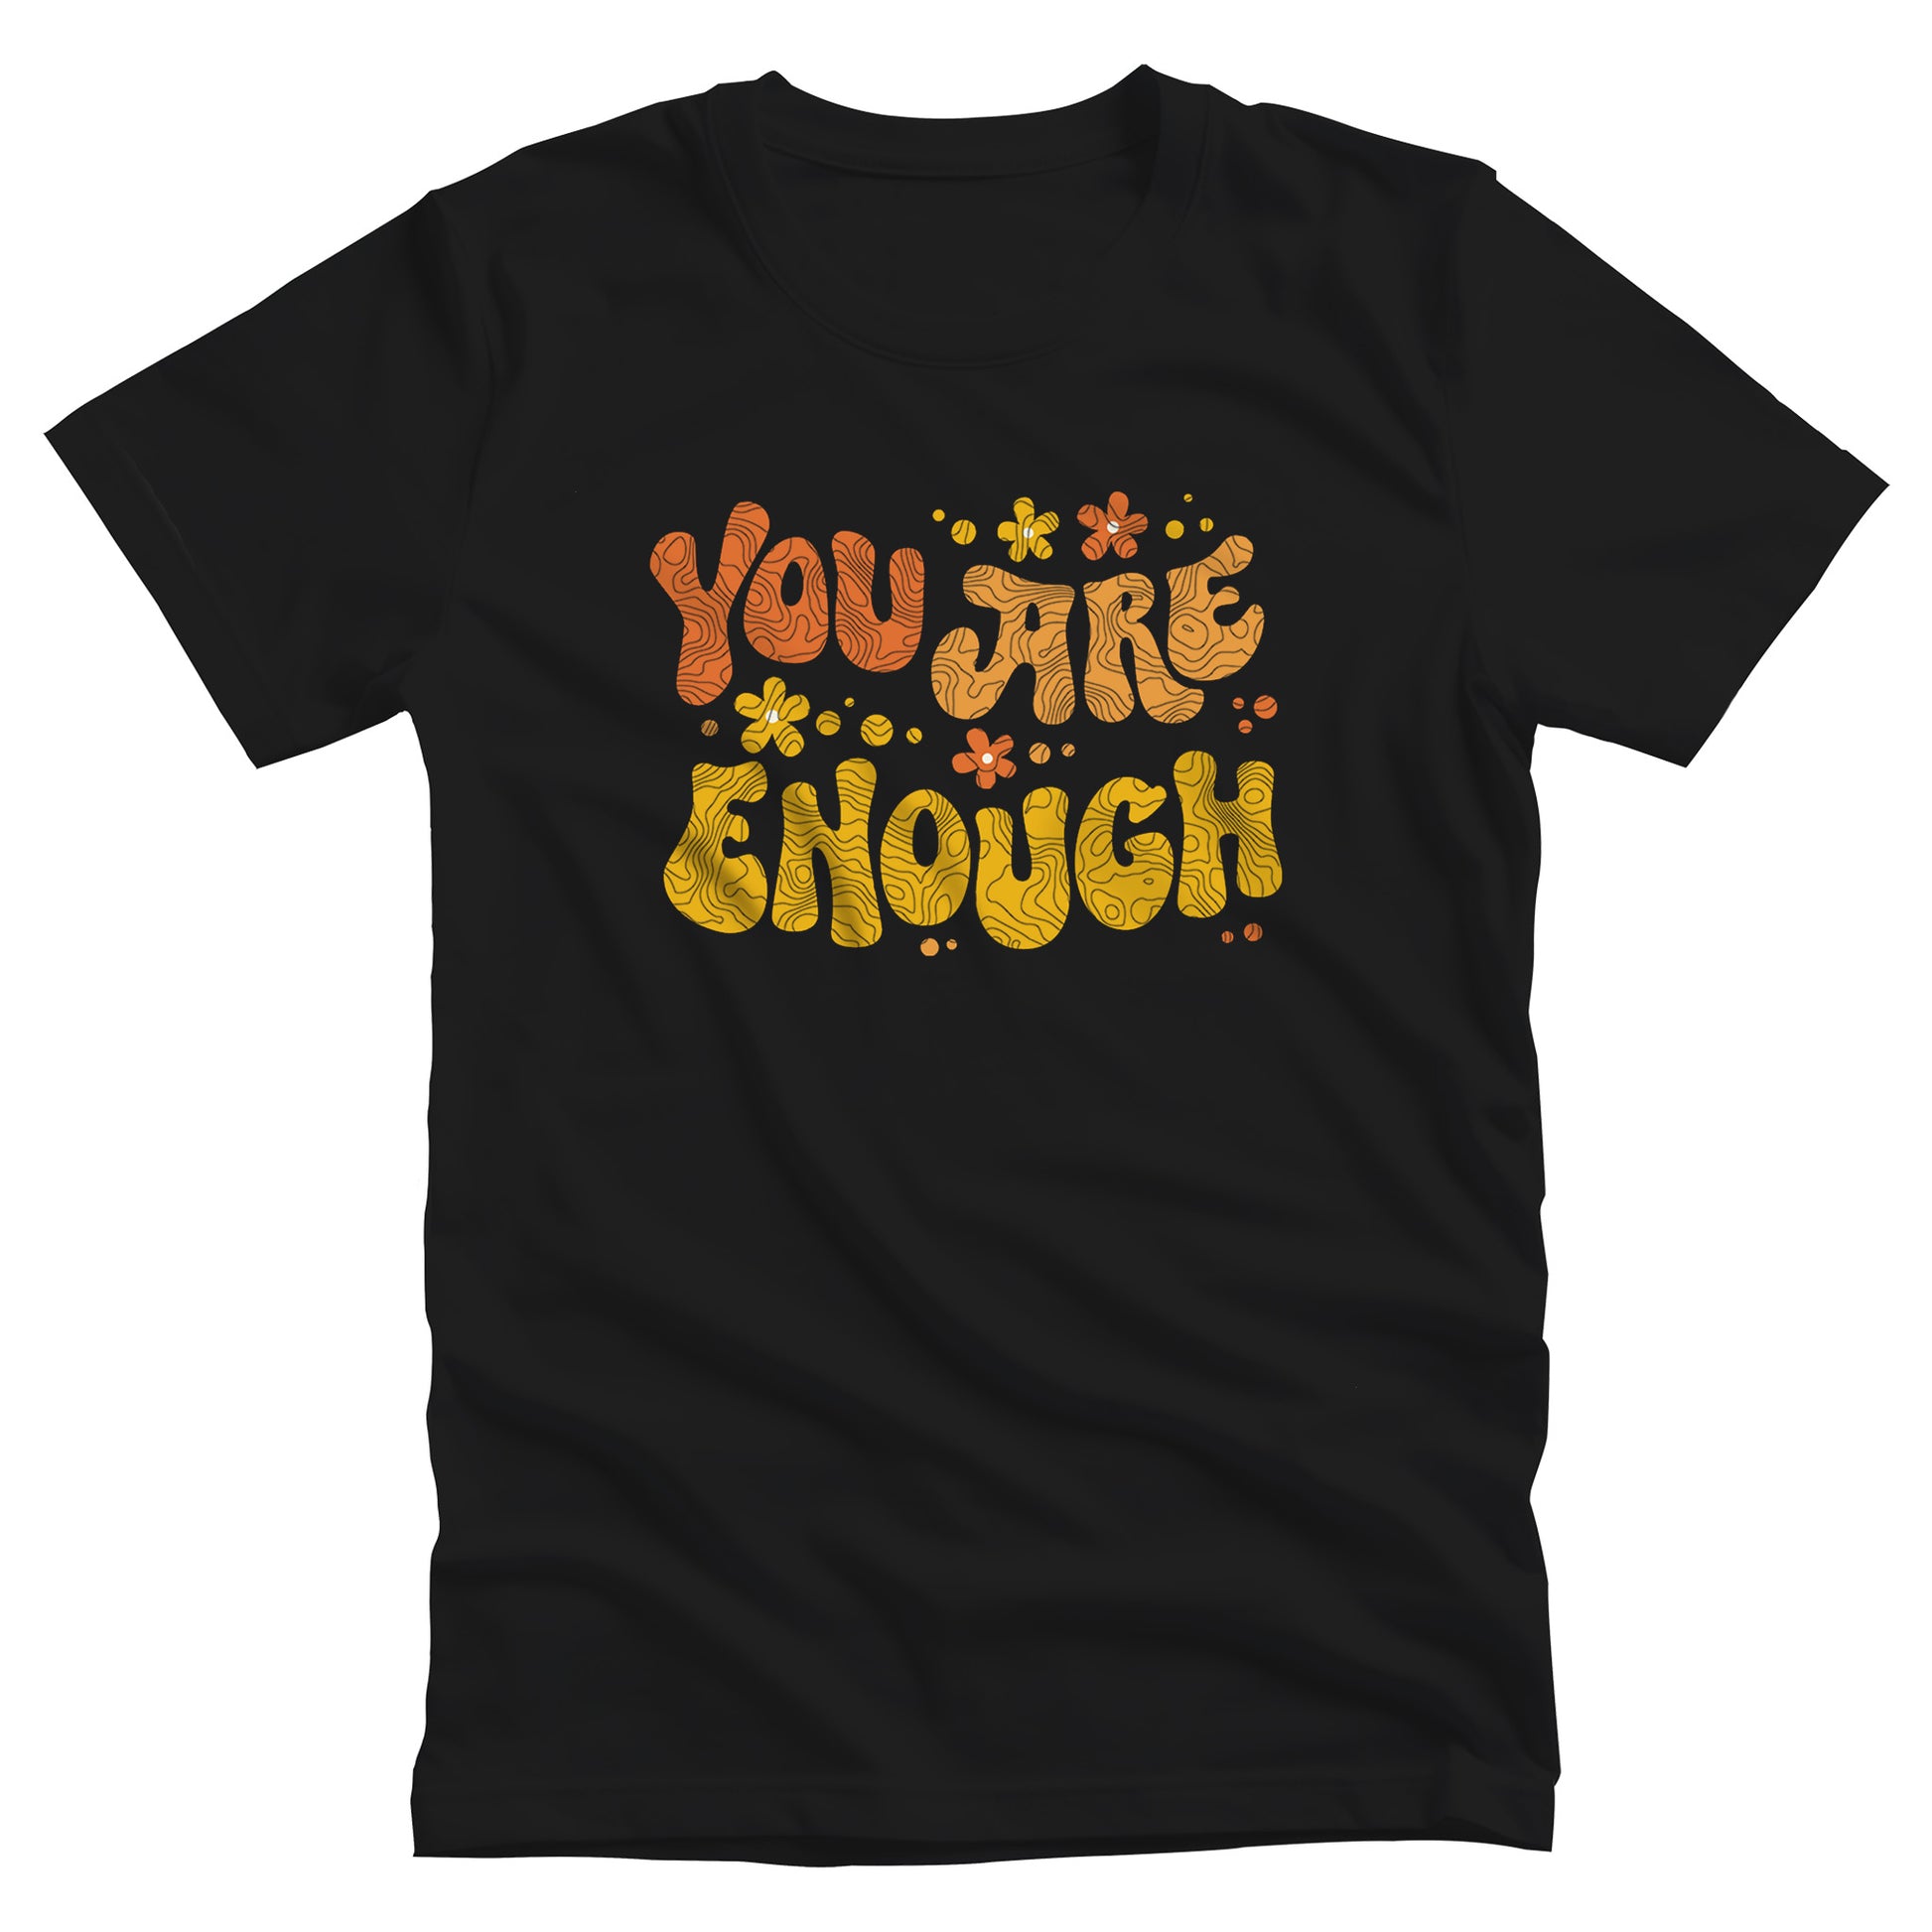 Black unisex t-shirt with a graphic that says “You Are Enough” in a retro font. There are small retro flowers spaced throughout. “You” is reddish-orange, “Are” is orange, and “Enough” is yellow, all retro as well.